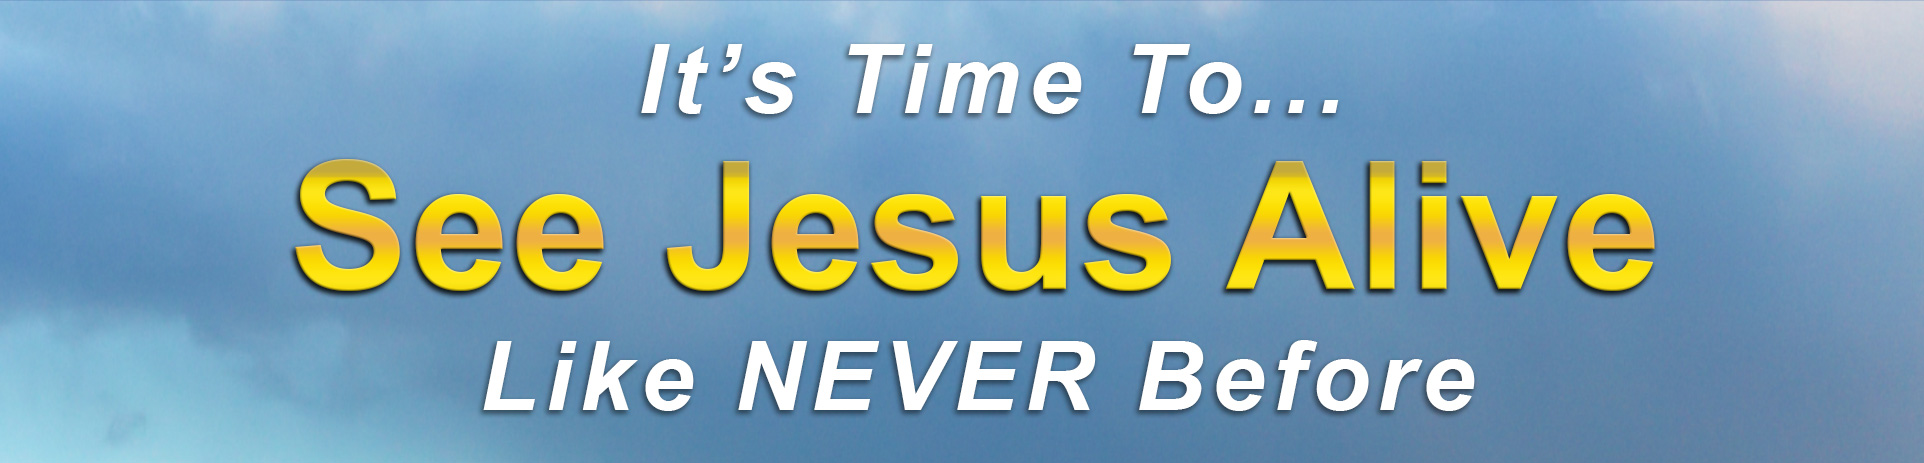 It's Time To... See Jesus Alive. Like NEVER Before